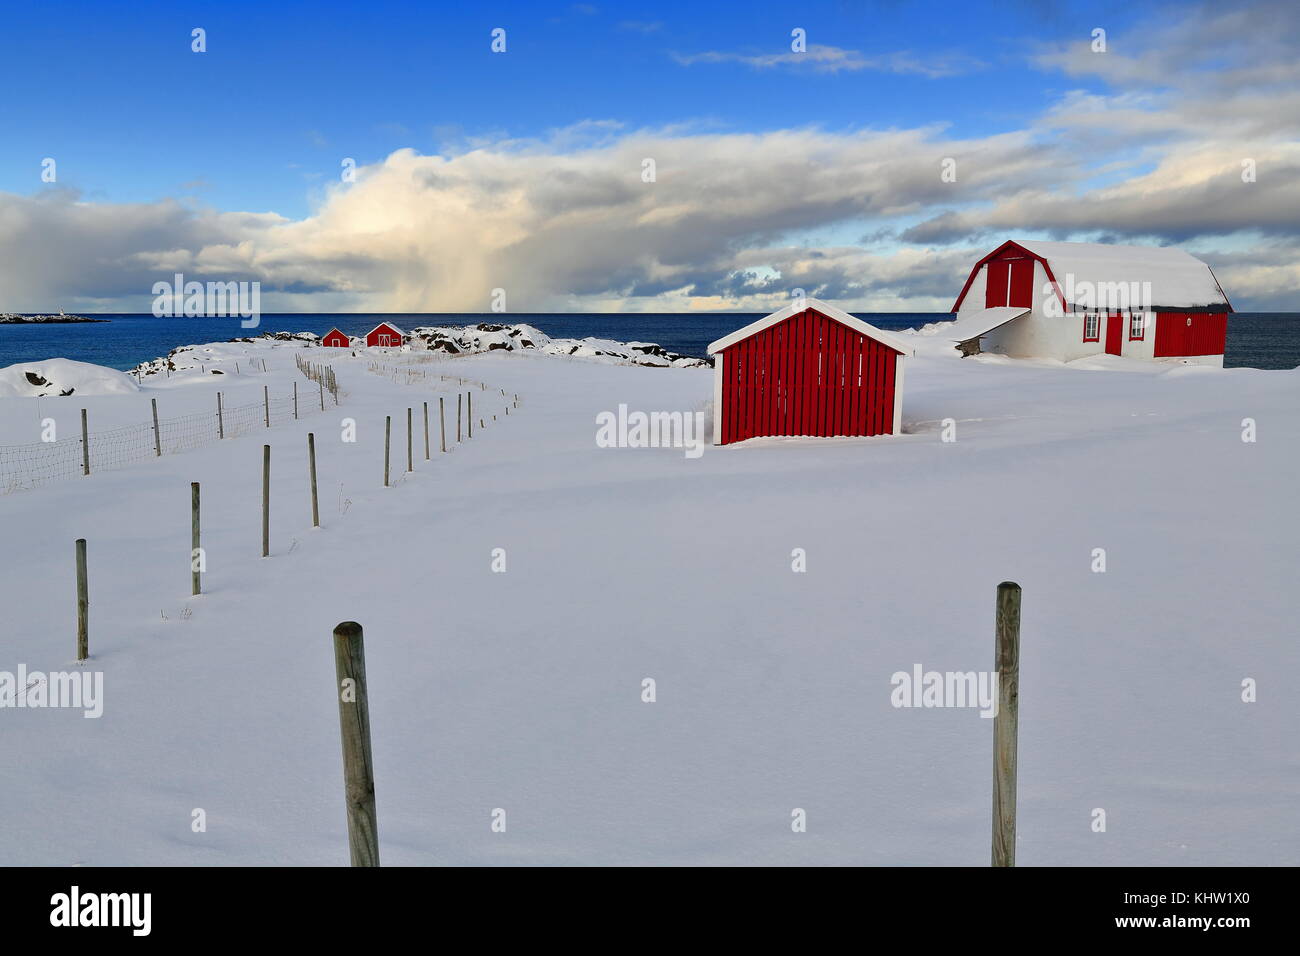 Red-white traditional fishing huts-robuer now for tourist use beside Fv 862 road on the N.shore of Gimsoya island under thick snow blanket near Hovsvi Stock Photo